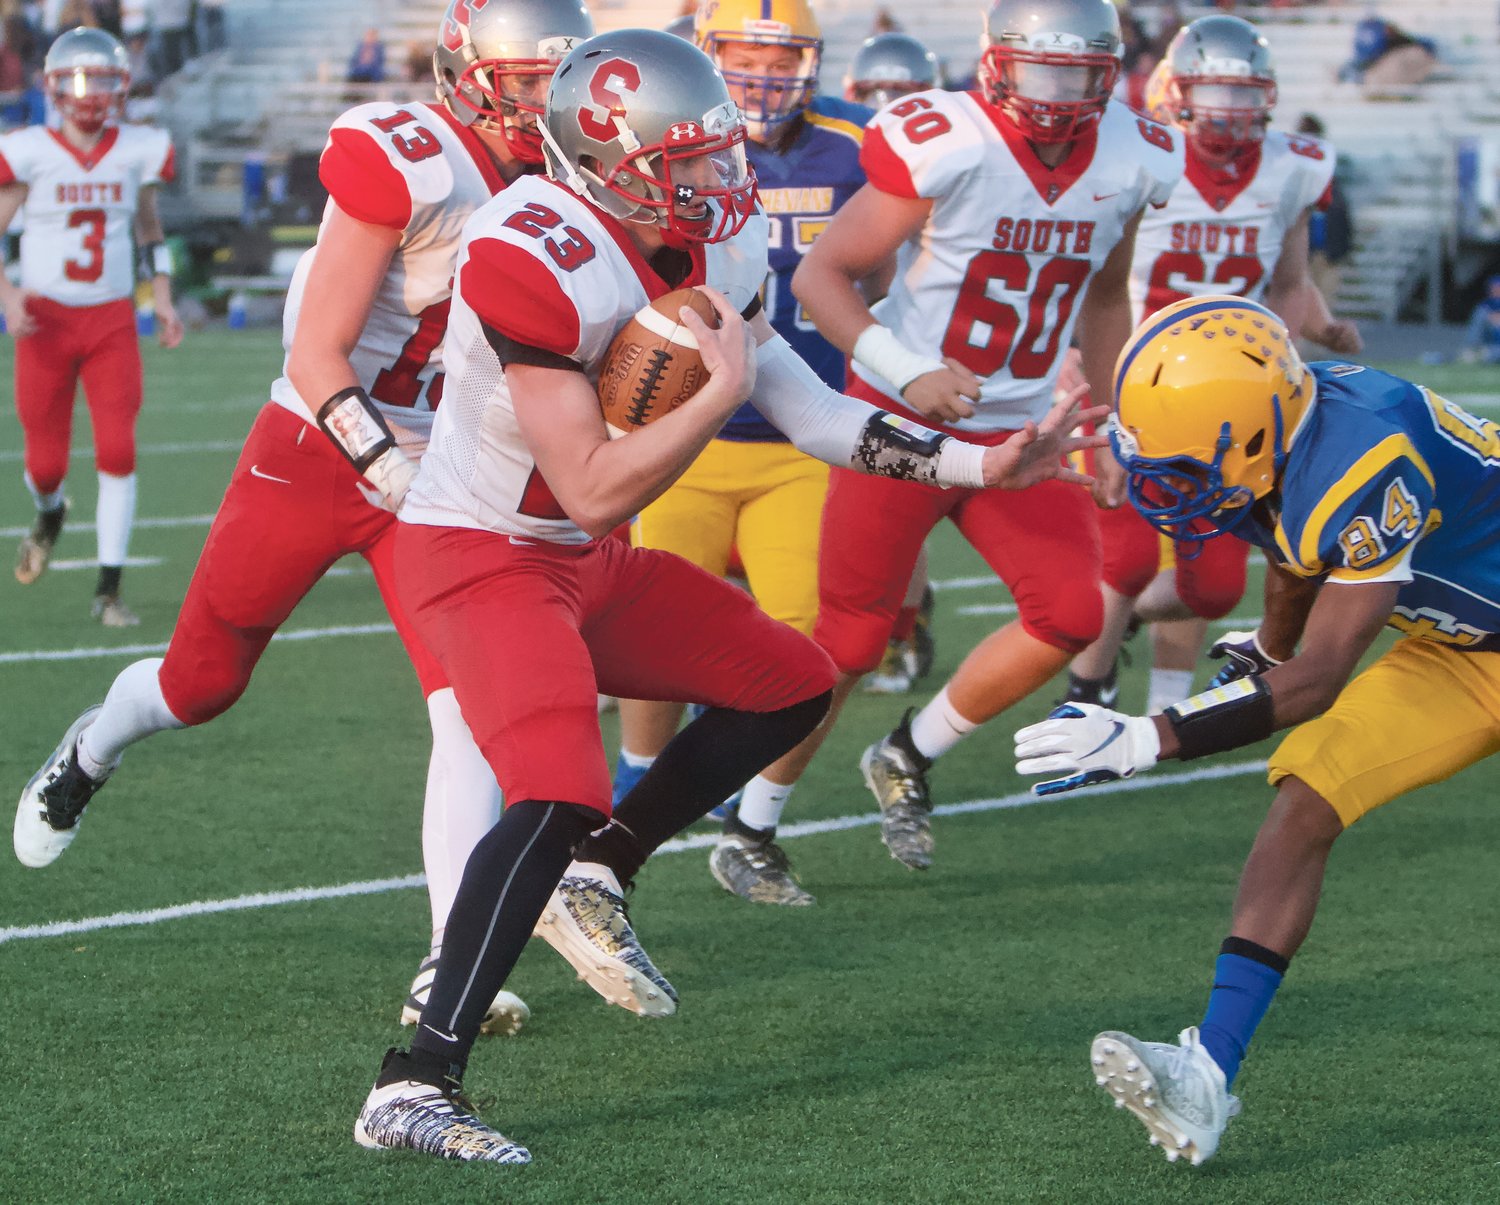 Southmont's Carson Chadd led the Mounties with 168 rushing yards and two scores in a 30-24 win over Crawfordsville on Friday.